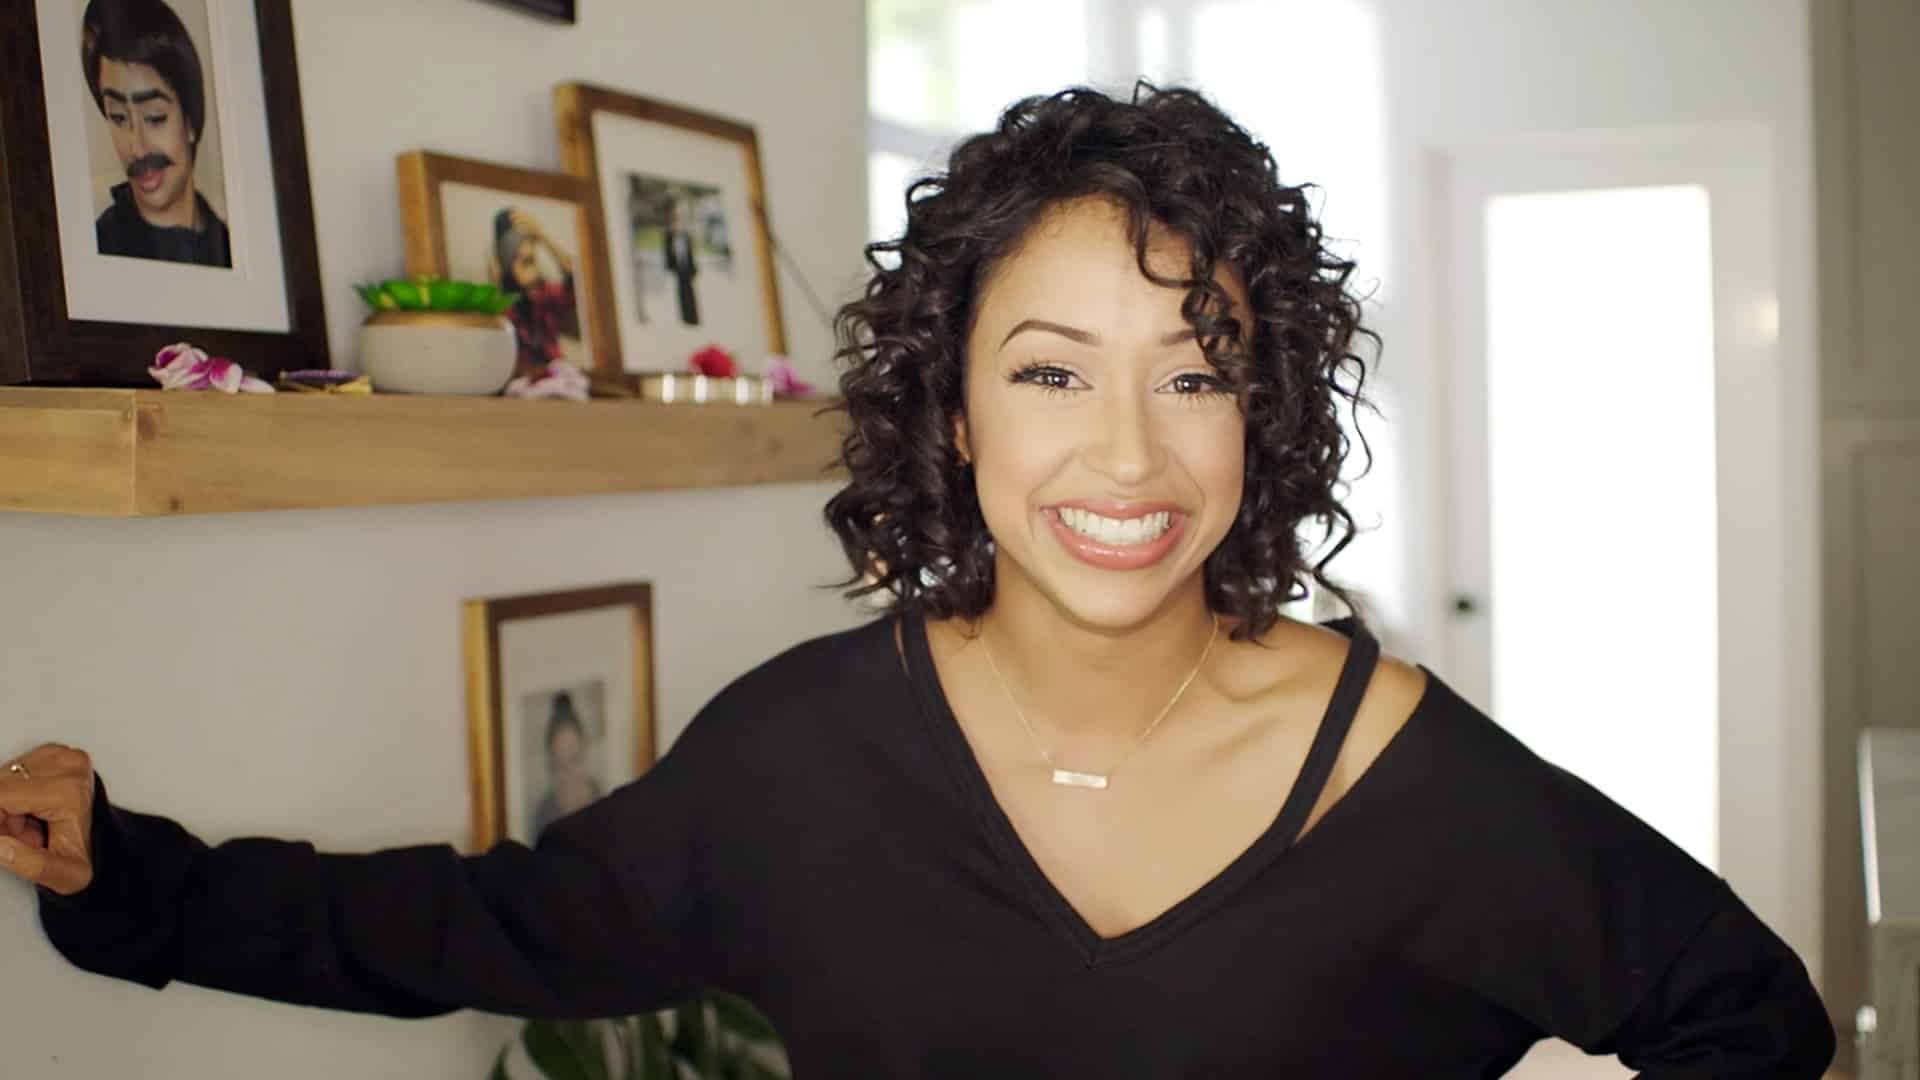 5 Richest Female Youtubers In The World